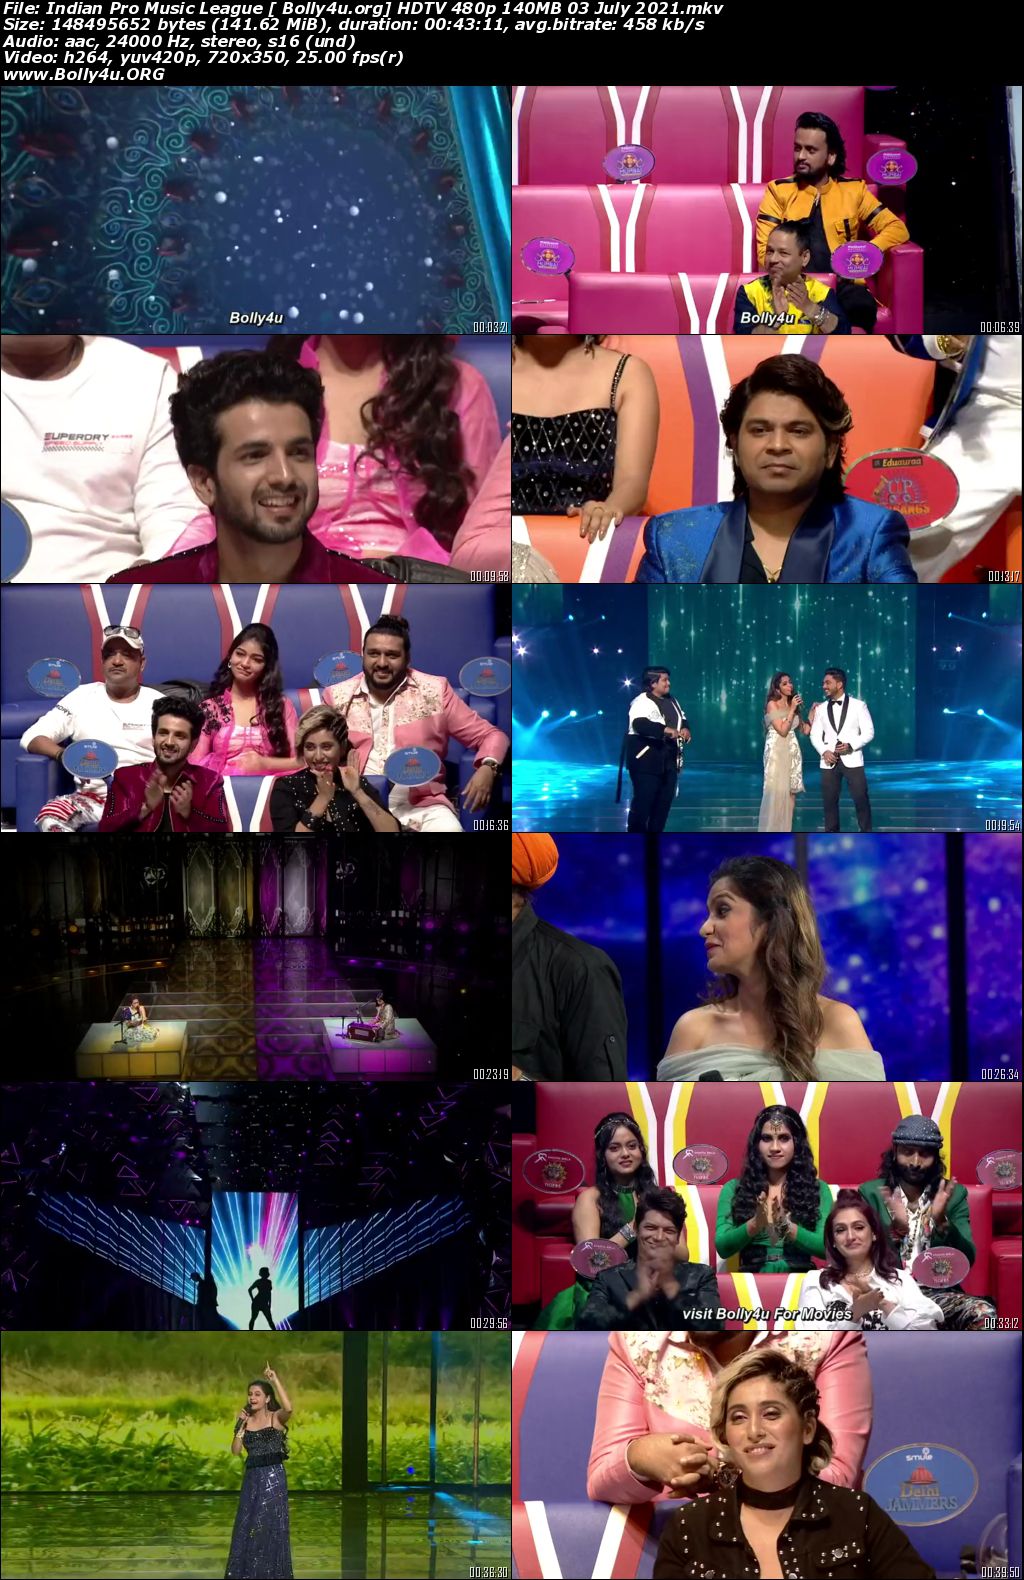 Indian Pro Music League HDTV 480p 140MB 03 July 2021 Download